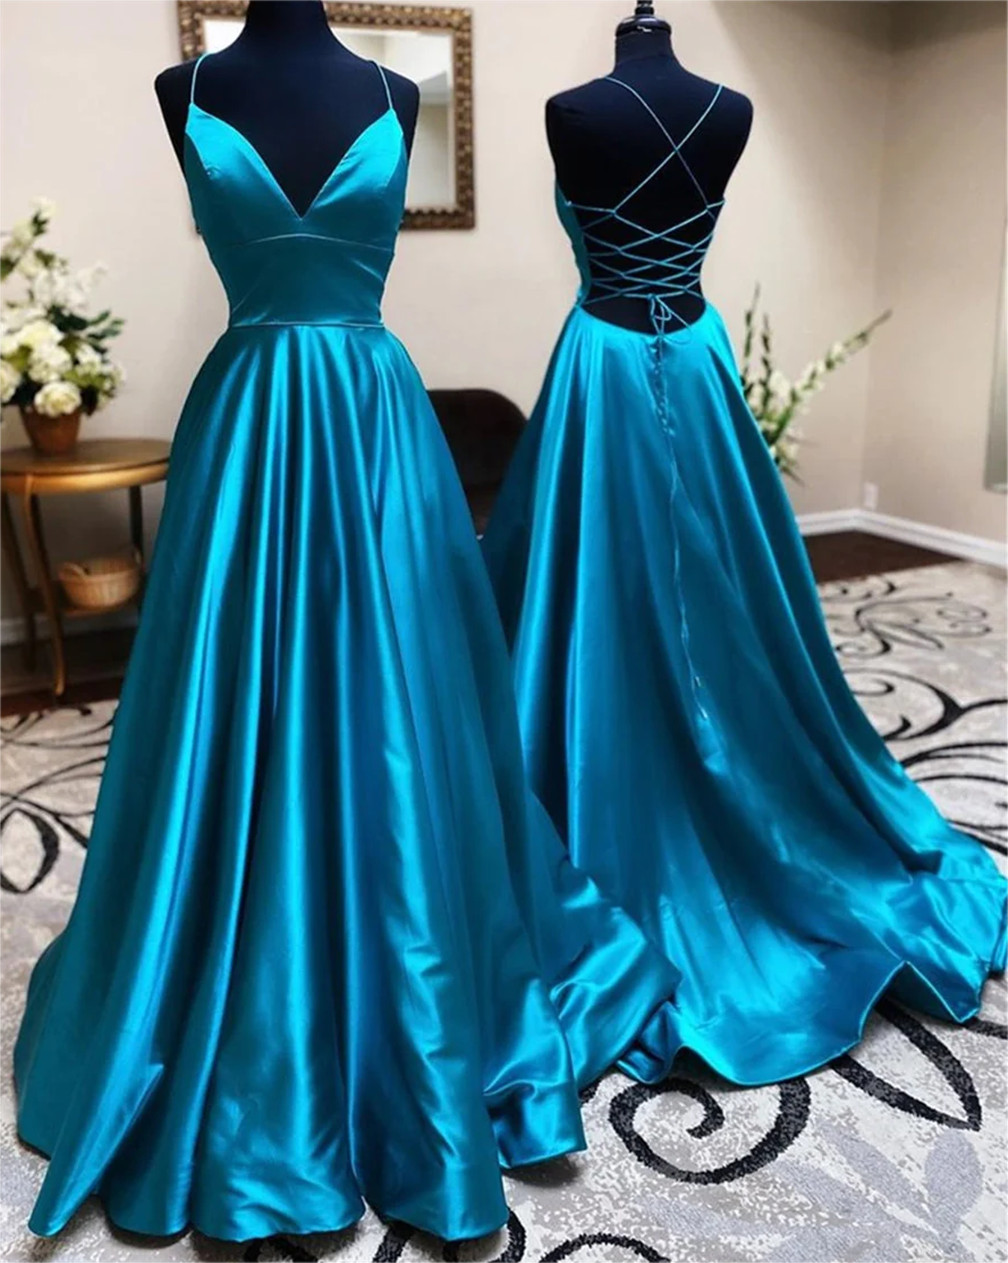 Women V Neck Satin Prom Dresses Long A-line Evening Party Gowns Sleeveless Formal Dress Yp071